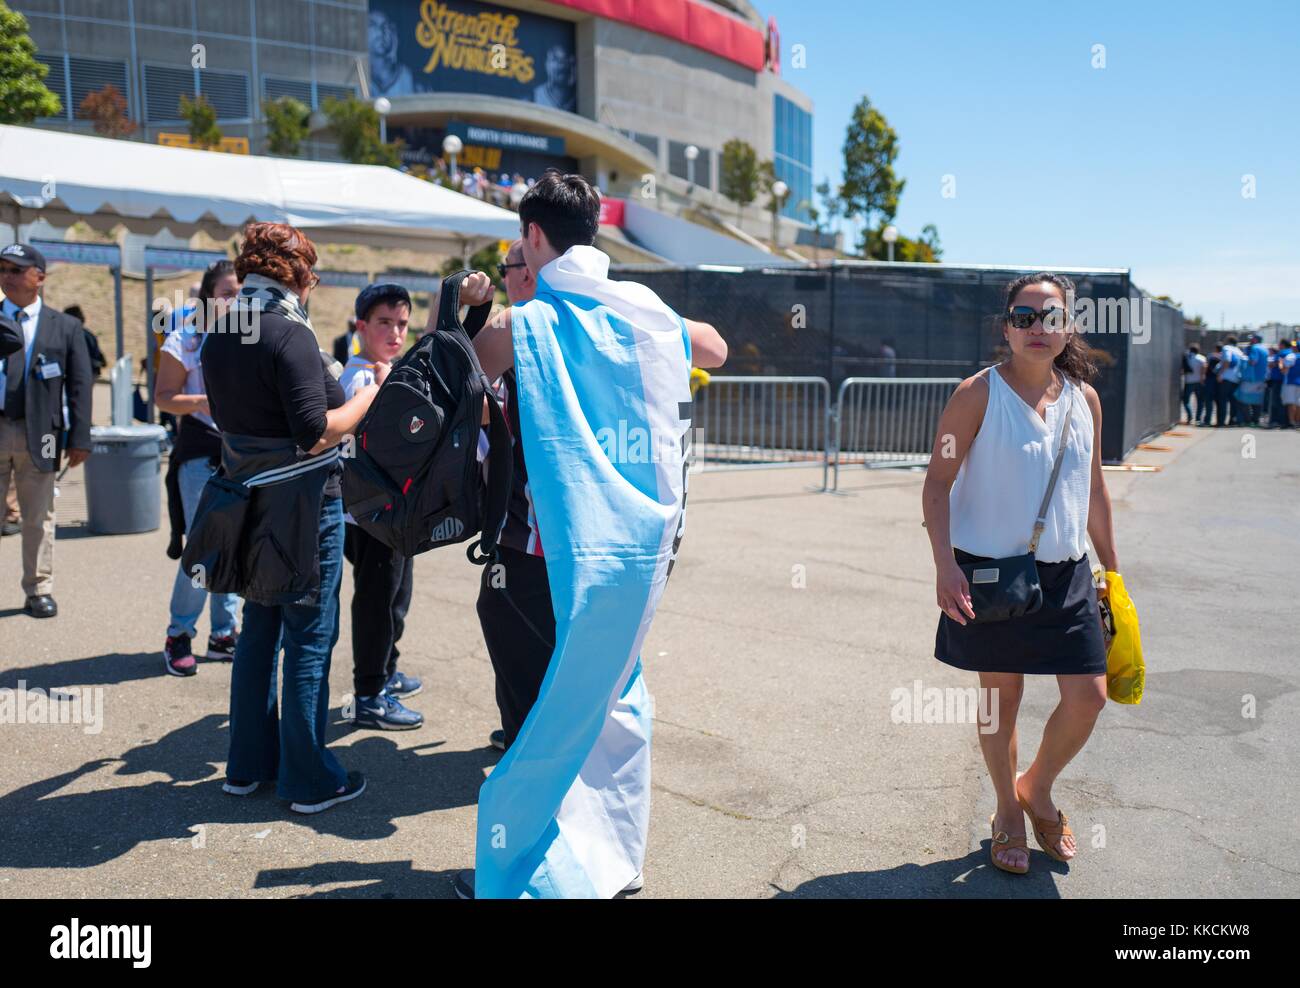 Before Game 2 of the National Basketball Association (NBA) Finals between the Golden State Warriors and the Cleveland Cavaliers, a fan of the Warriors wears a blue and white cape while approaching Oracle Arena in Oakland, California, June 5, 2016. Stock Photo